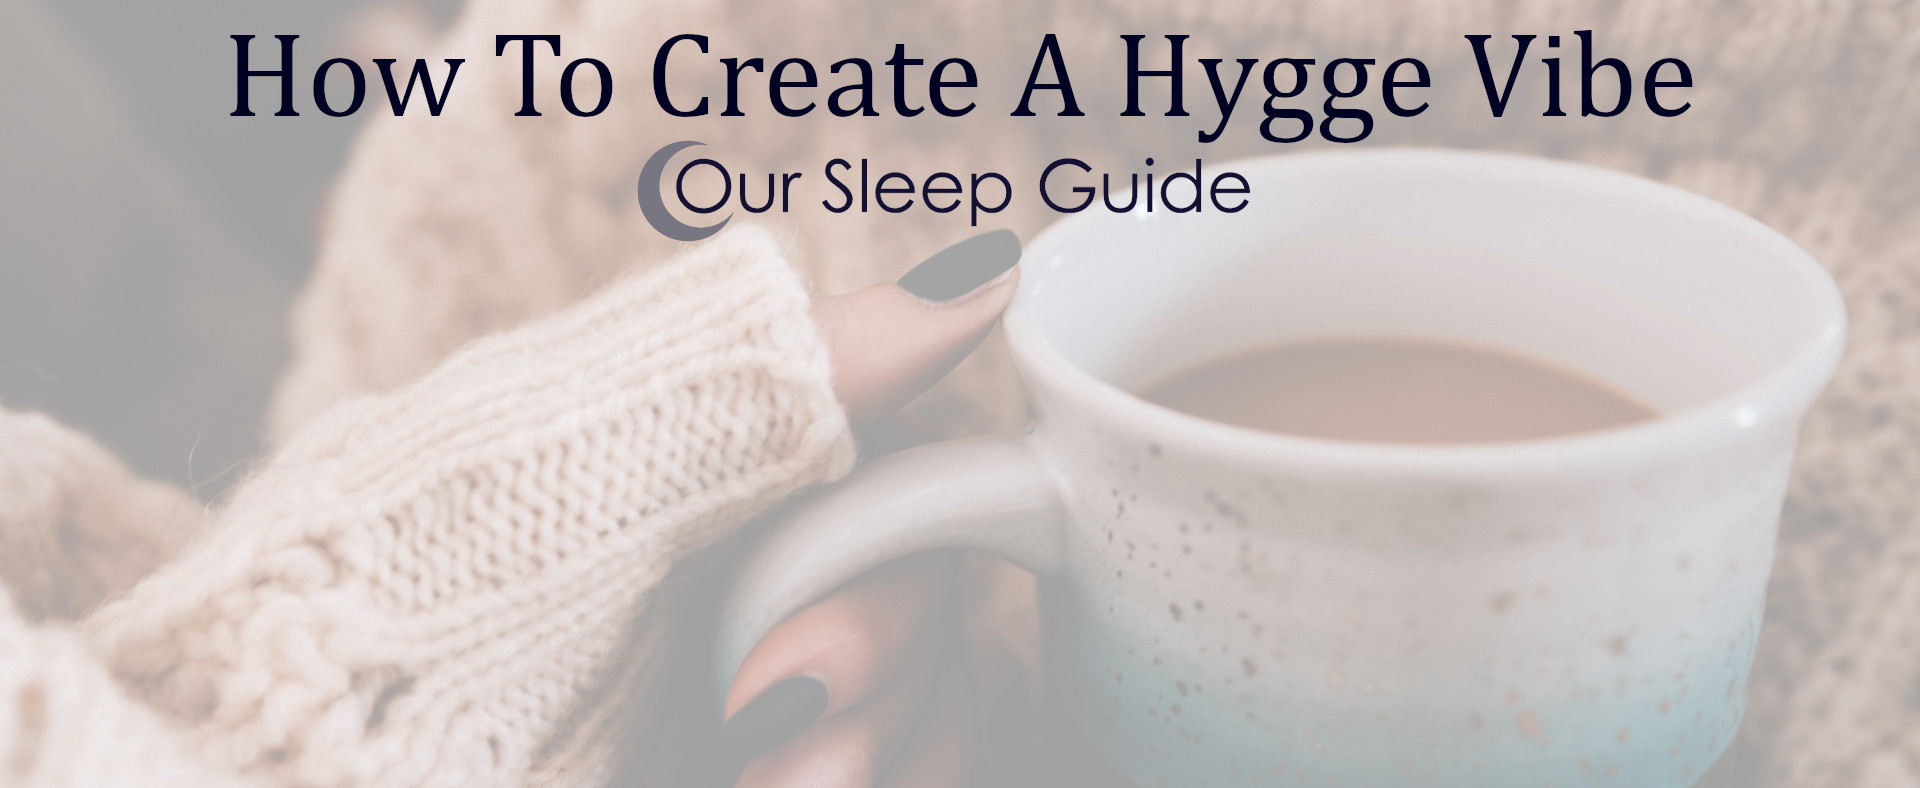 How To Create A Hygge Vibe